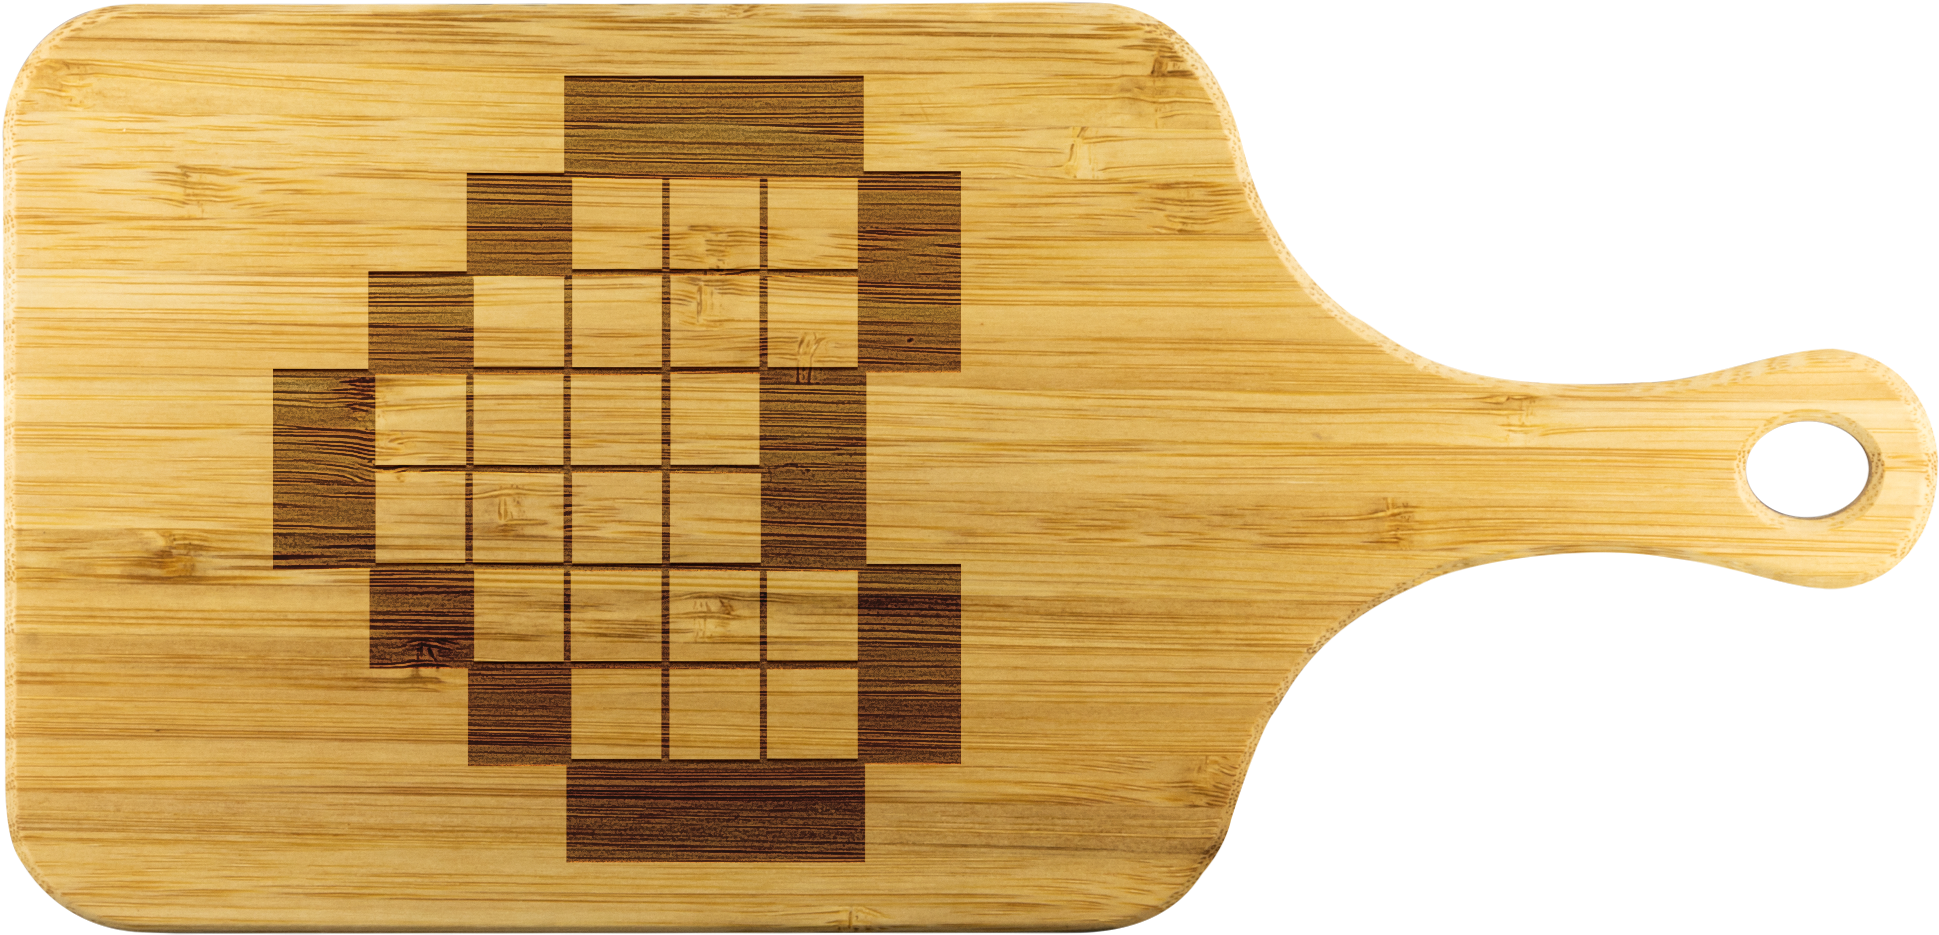 A Wooden Cutting Board With A Pattern On It